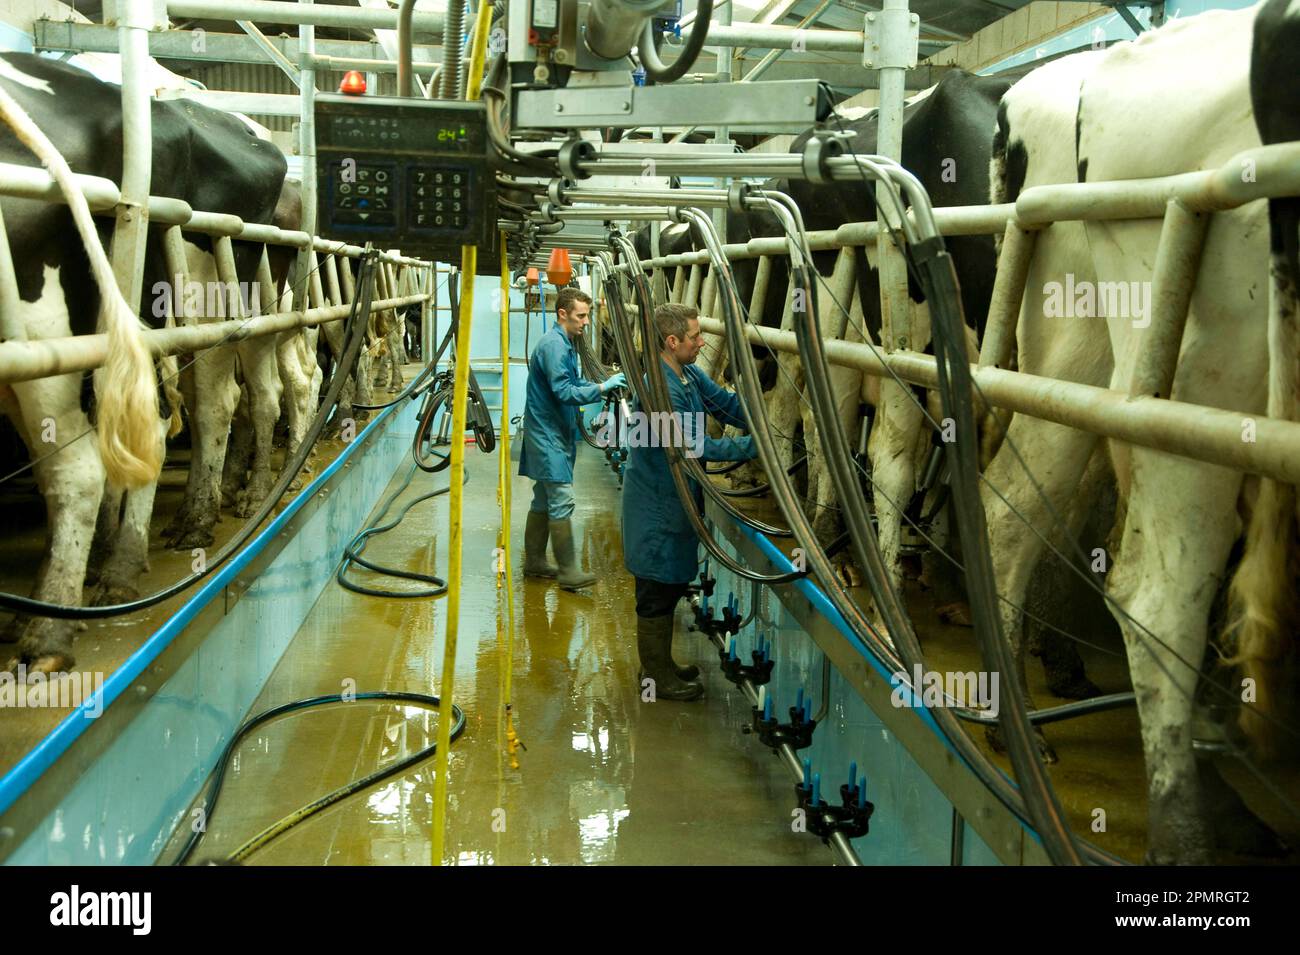 Domestic cattle, Holstein Friesian, cows in milking parlour with dairymen, England, Great Britain Stock Photo